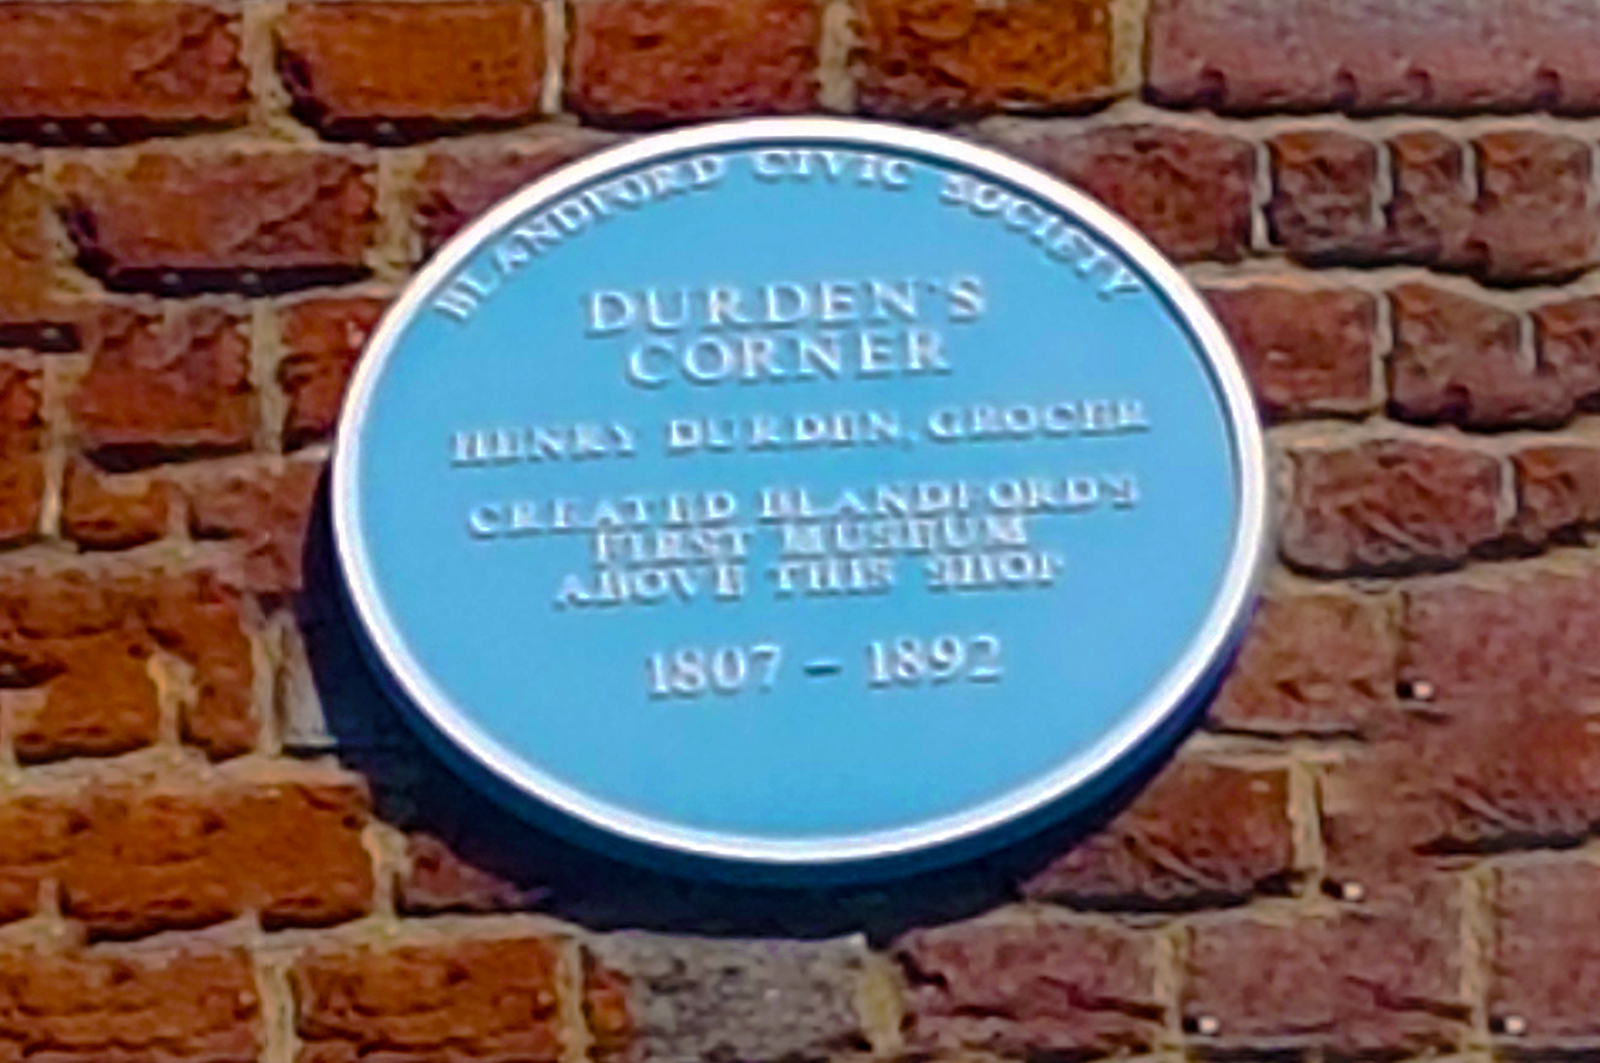 The plaque is in honour of Henry Durden. Picture: SMacB